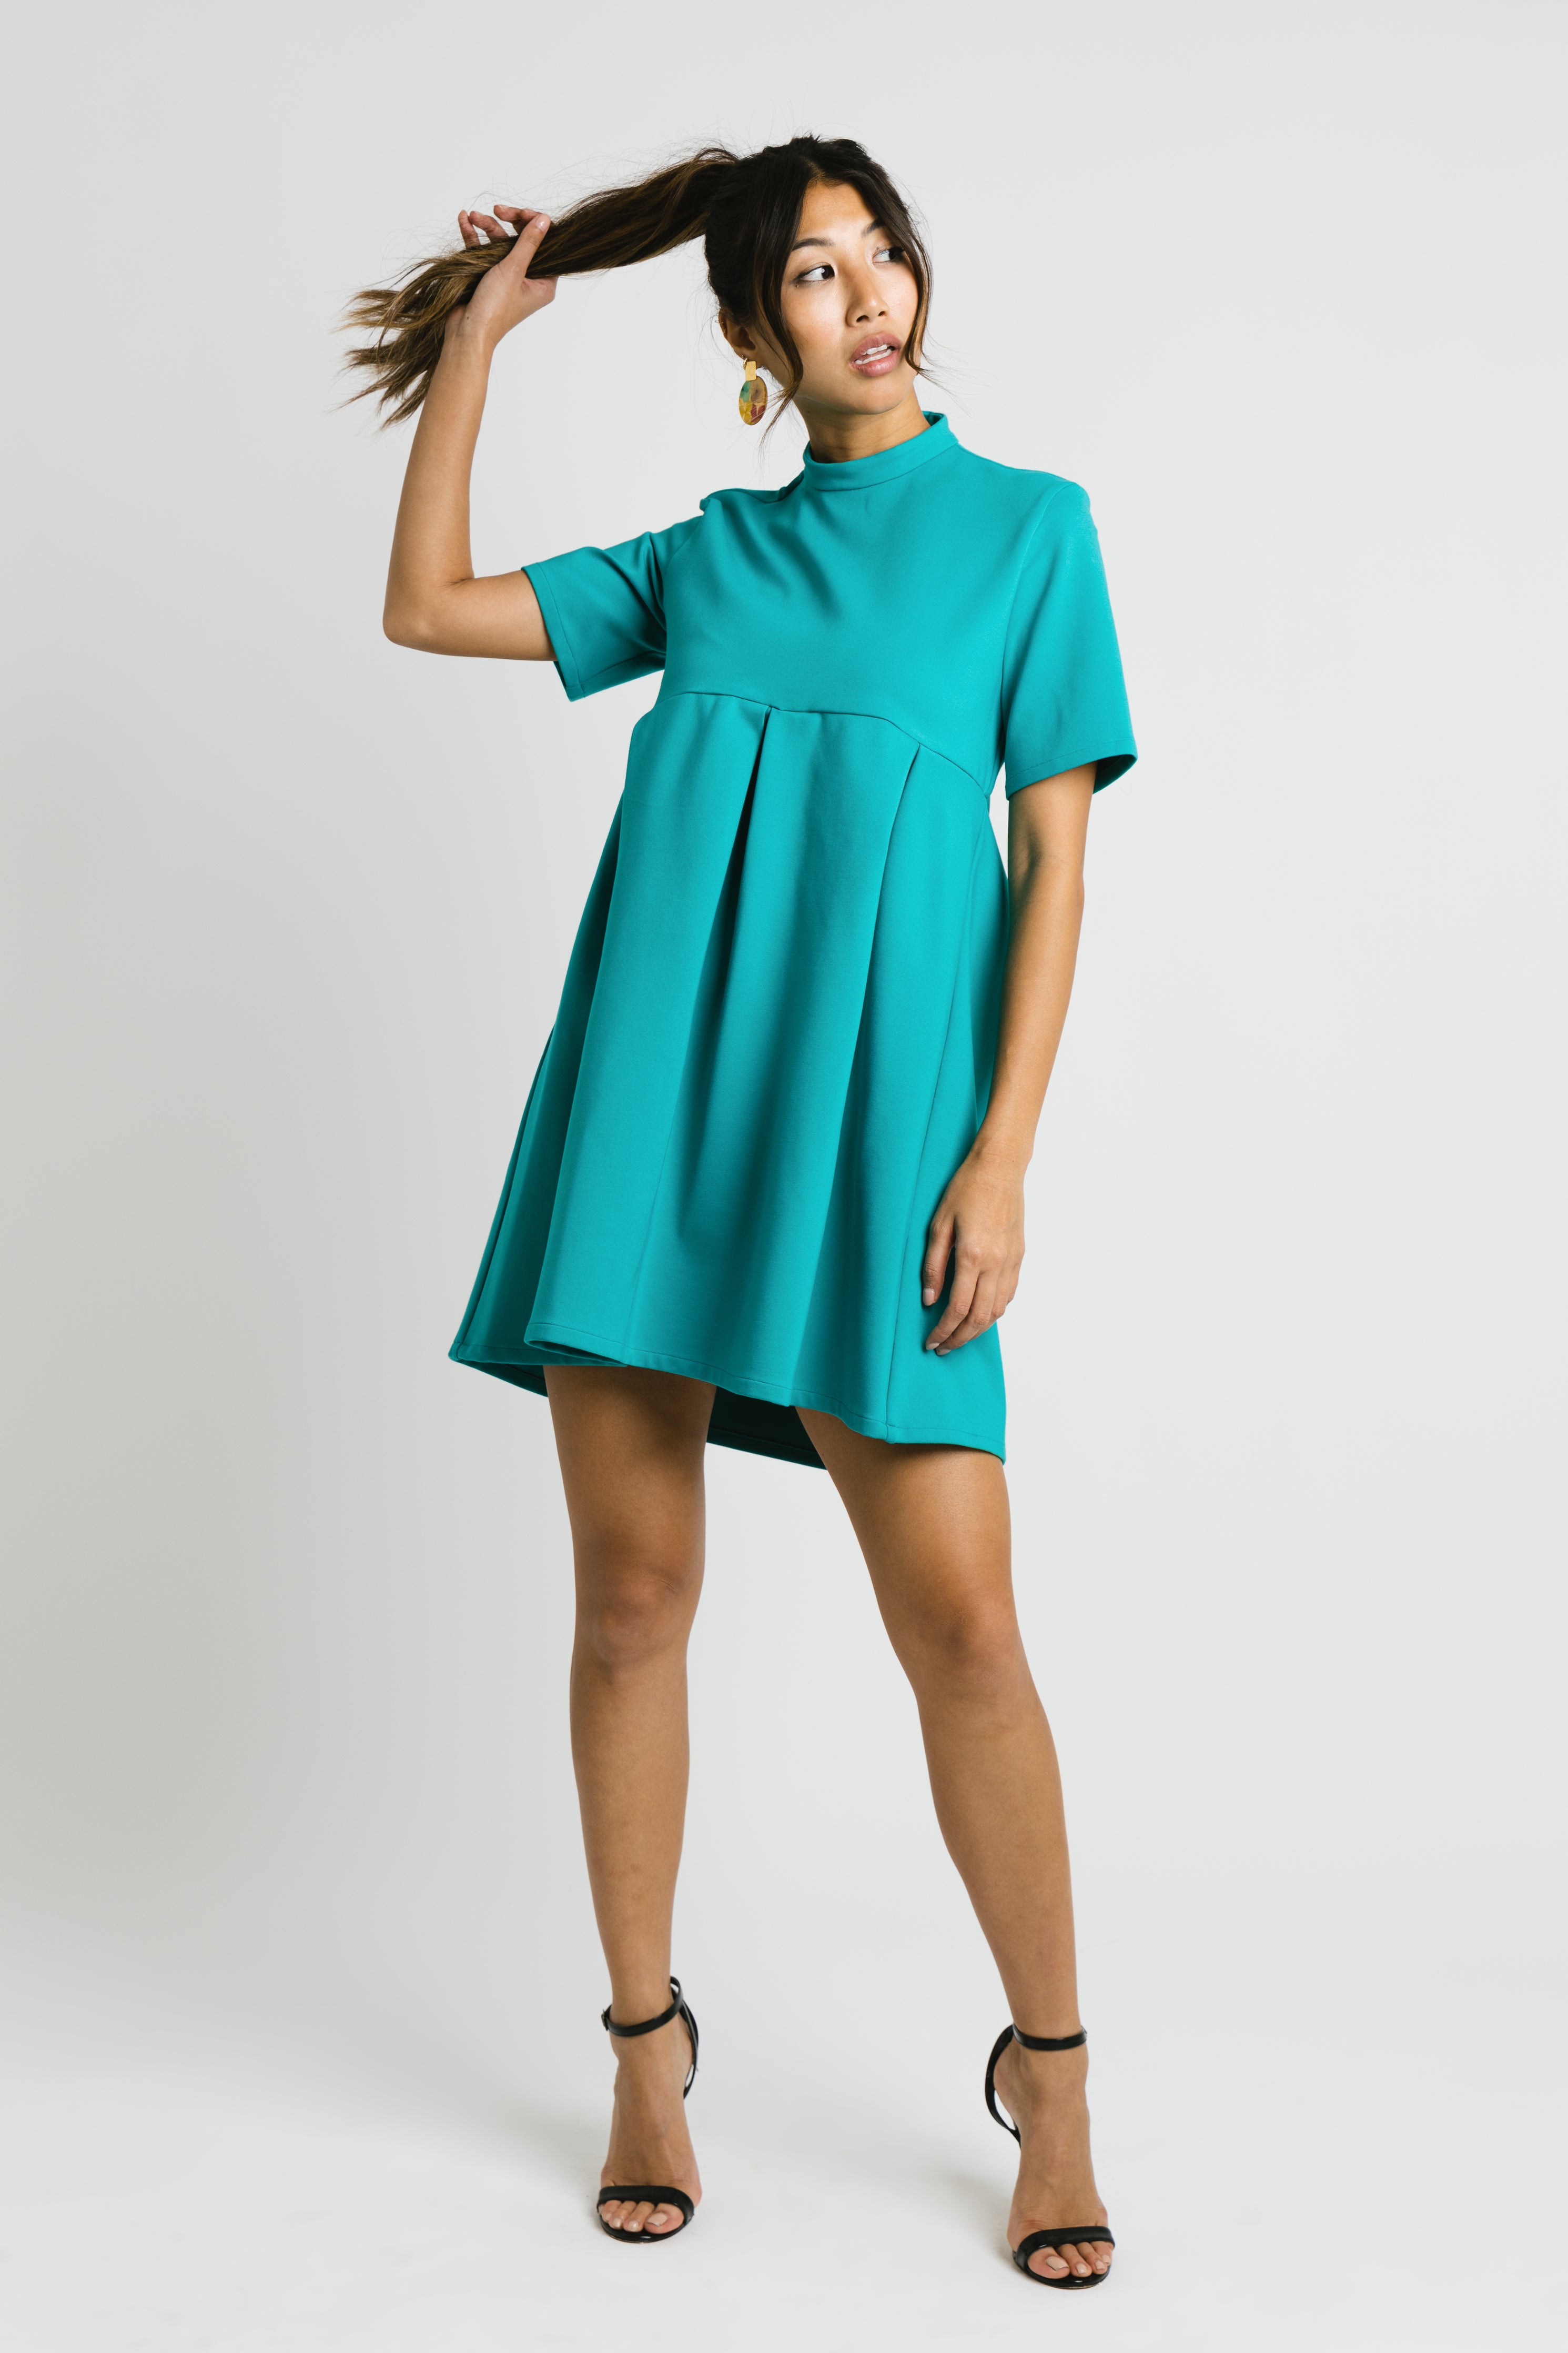 double jersey teal dress